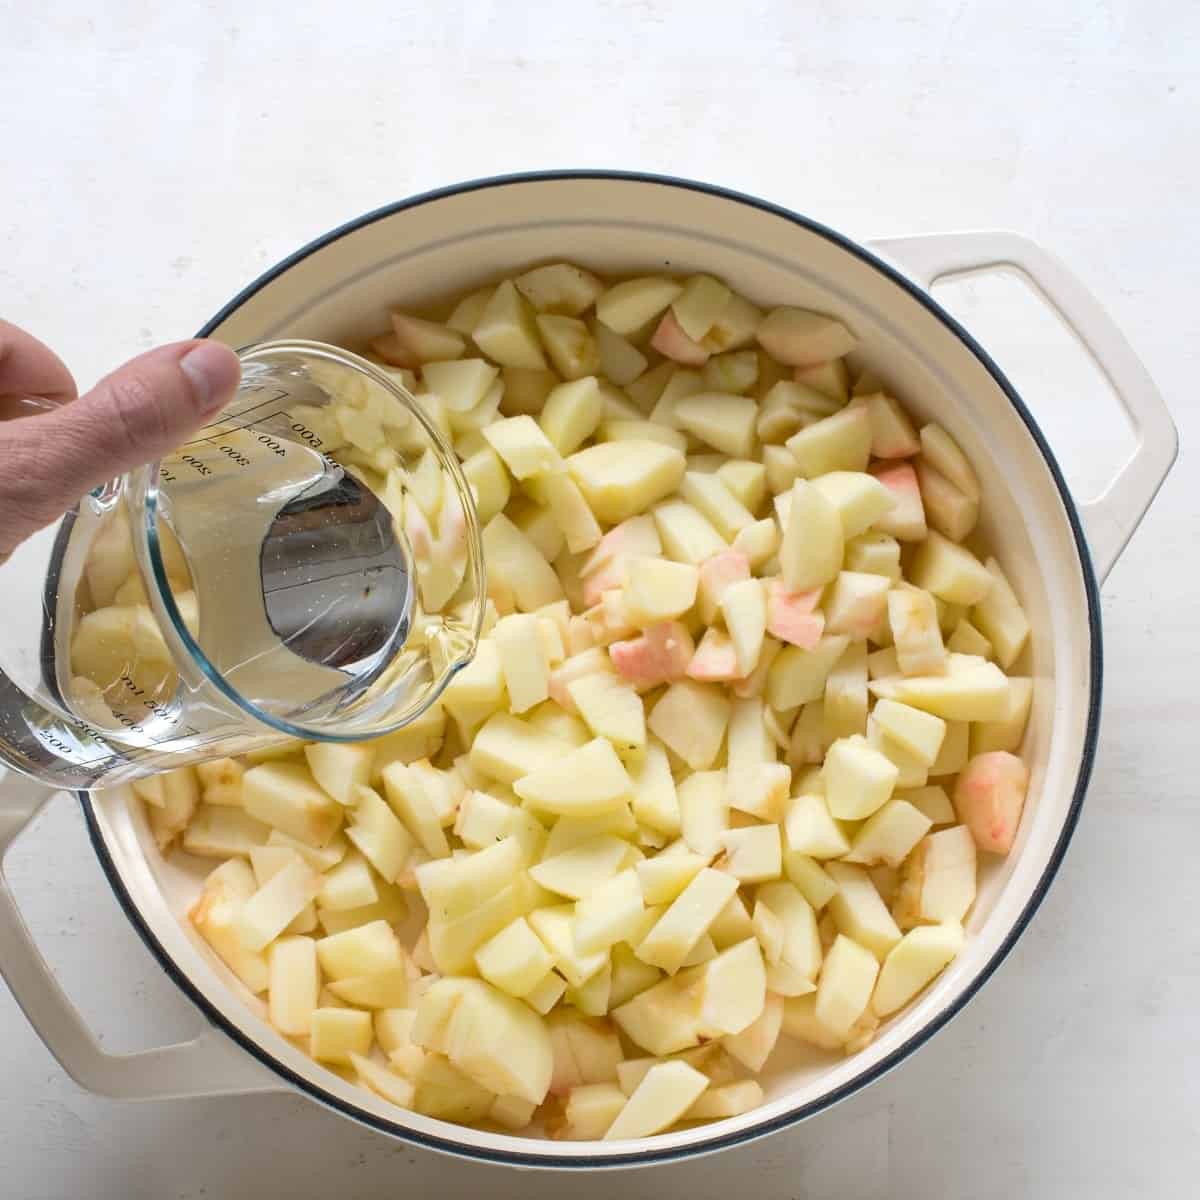 Pouring water over sliced apples placed in a pan.